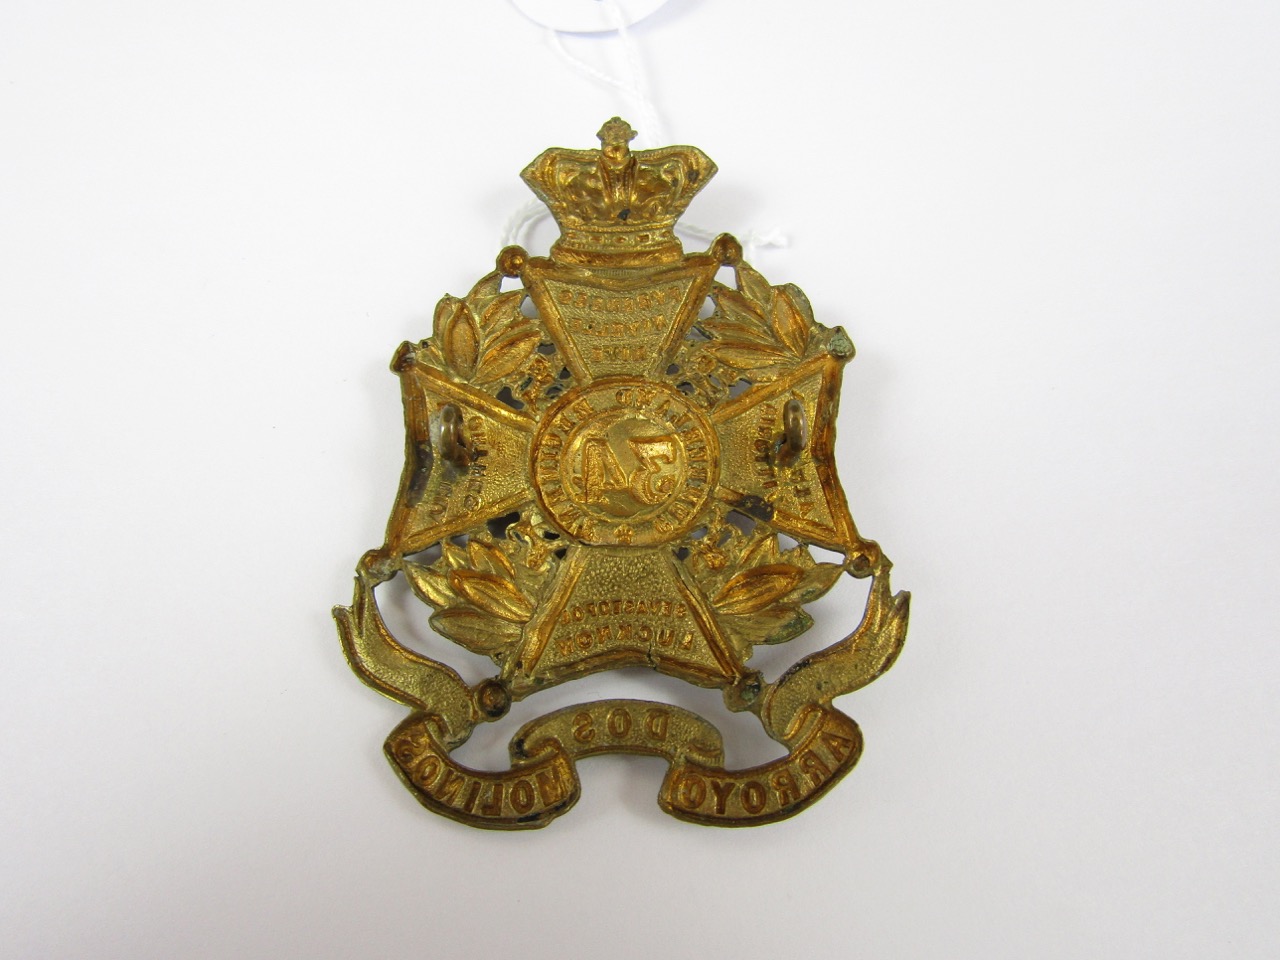 A 34th of Foot second pattern glengarry badge - Image 2 of 2